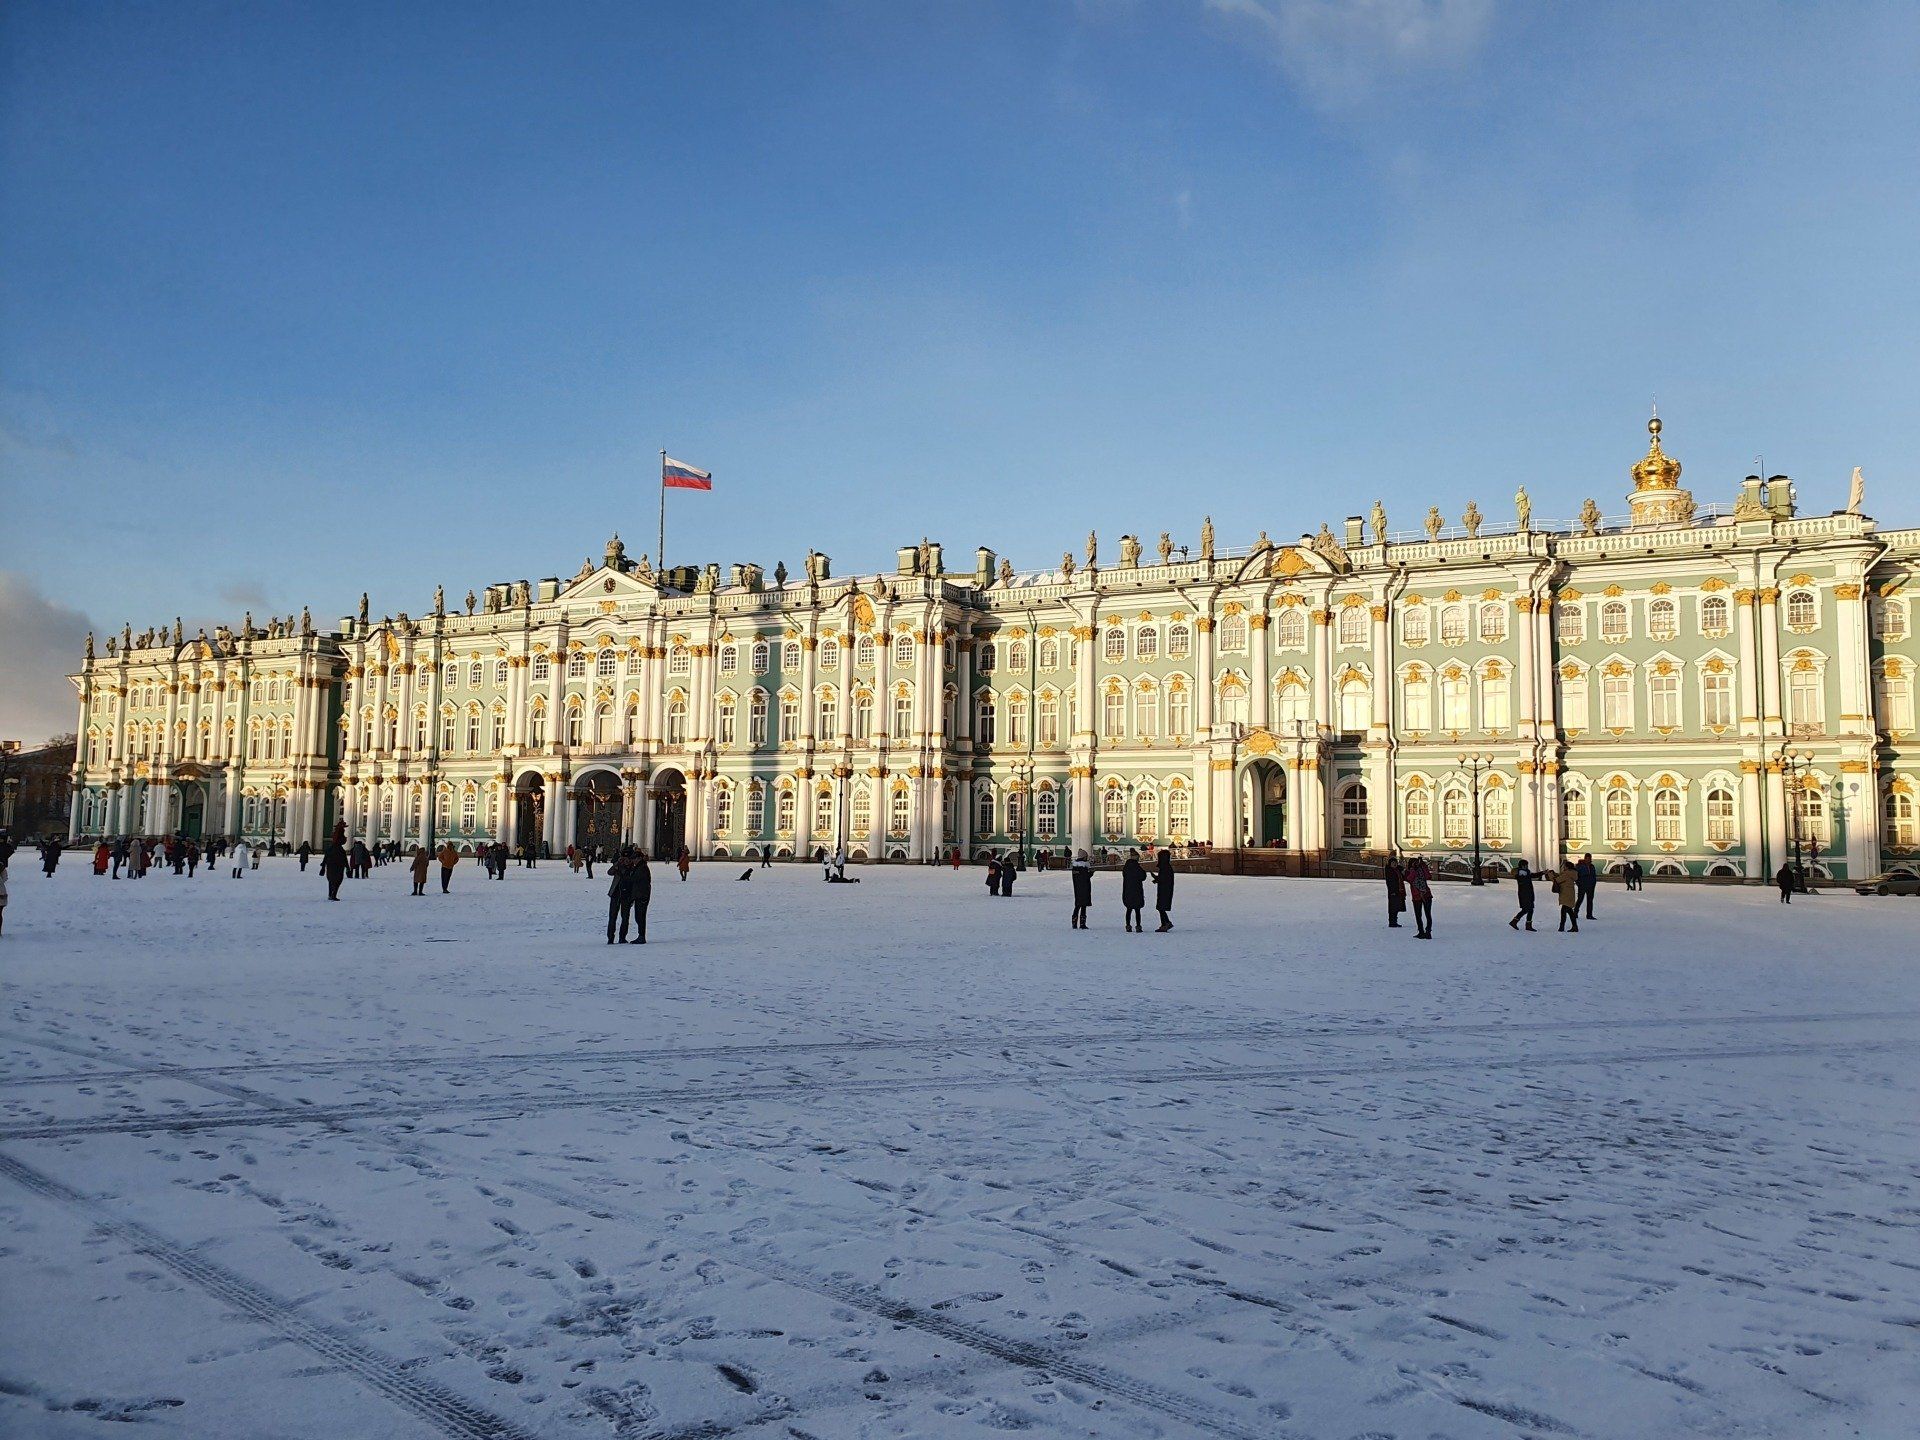 A snowy Hermitage and Winter Palace in St. Petersburg, Russia